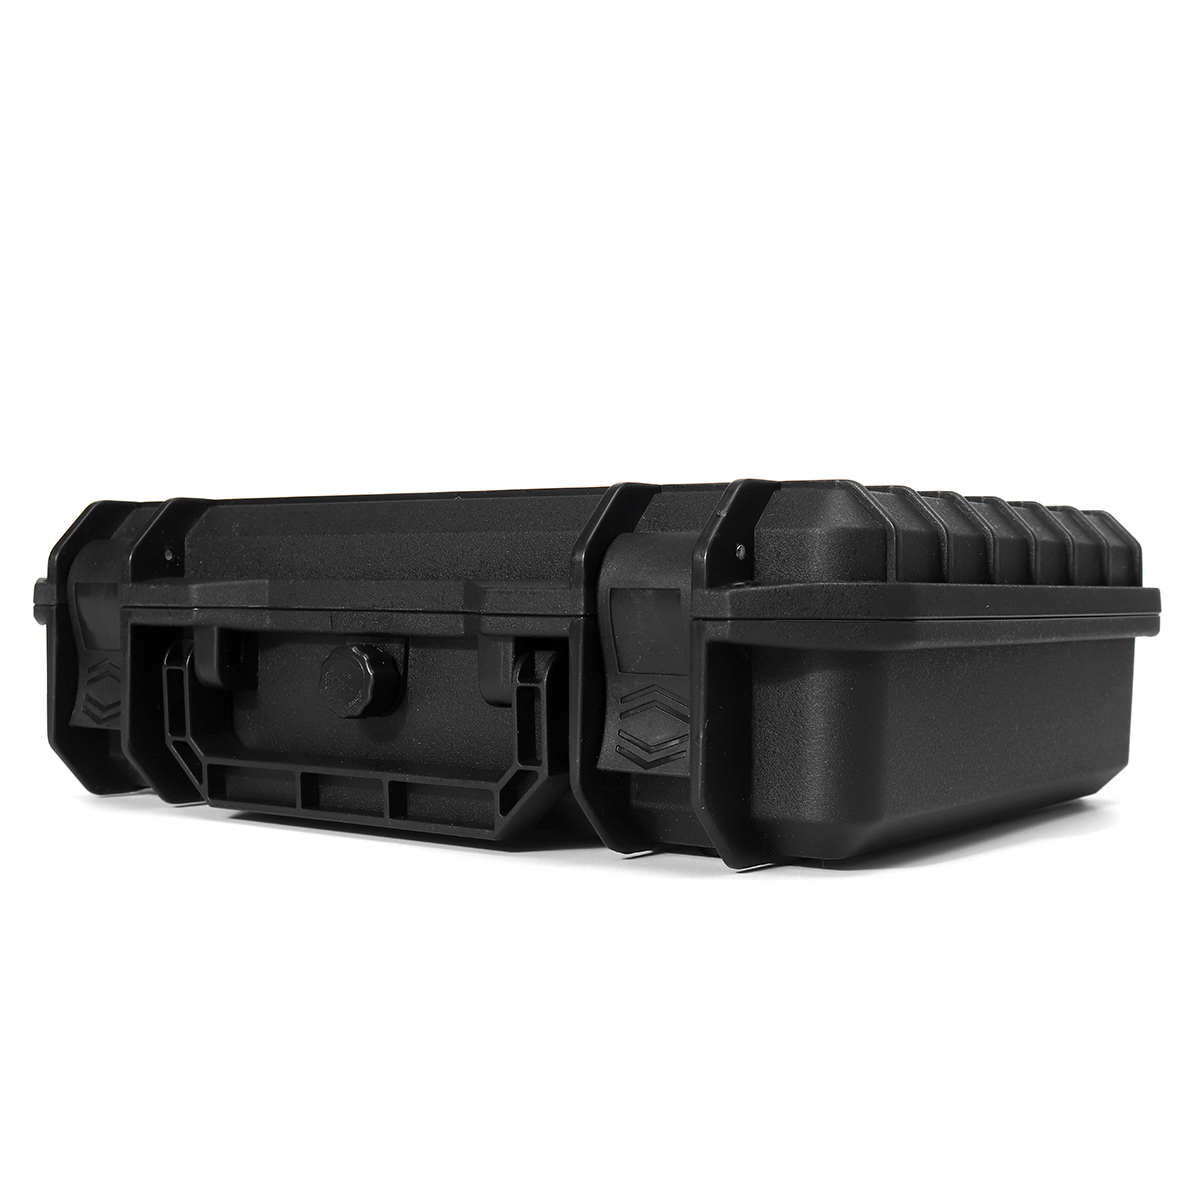 Waterproof-Hard-Carrying-Case-Bag-Tool-Storage-Box-Camera-Photography-with-Sponge-1664833-7